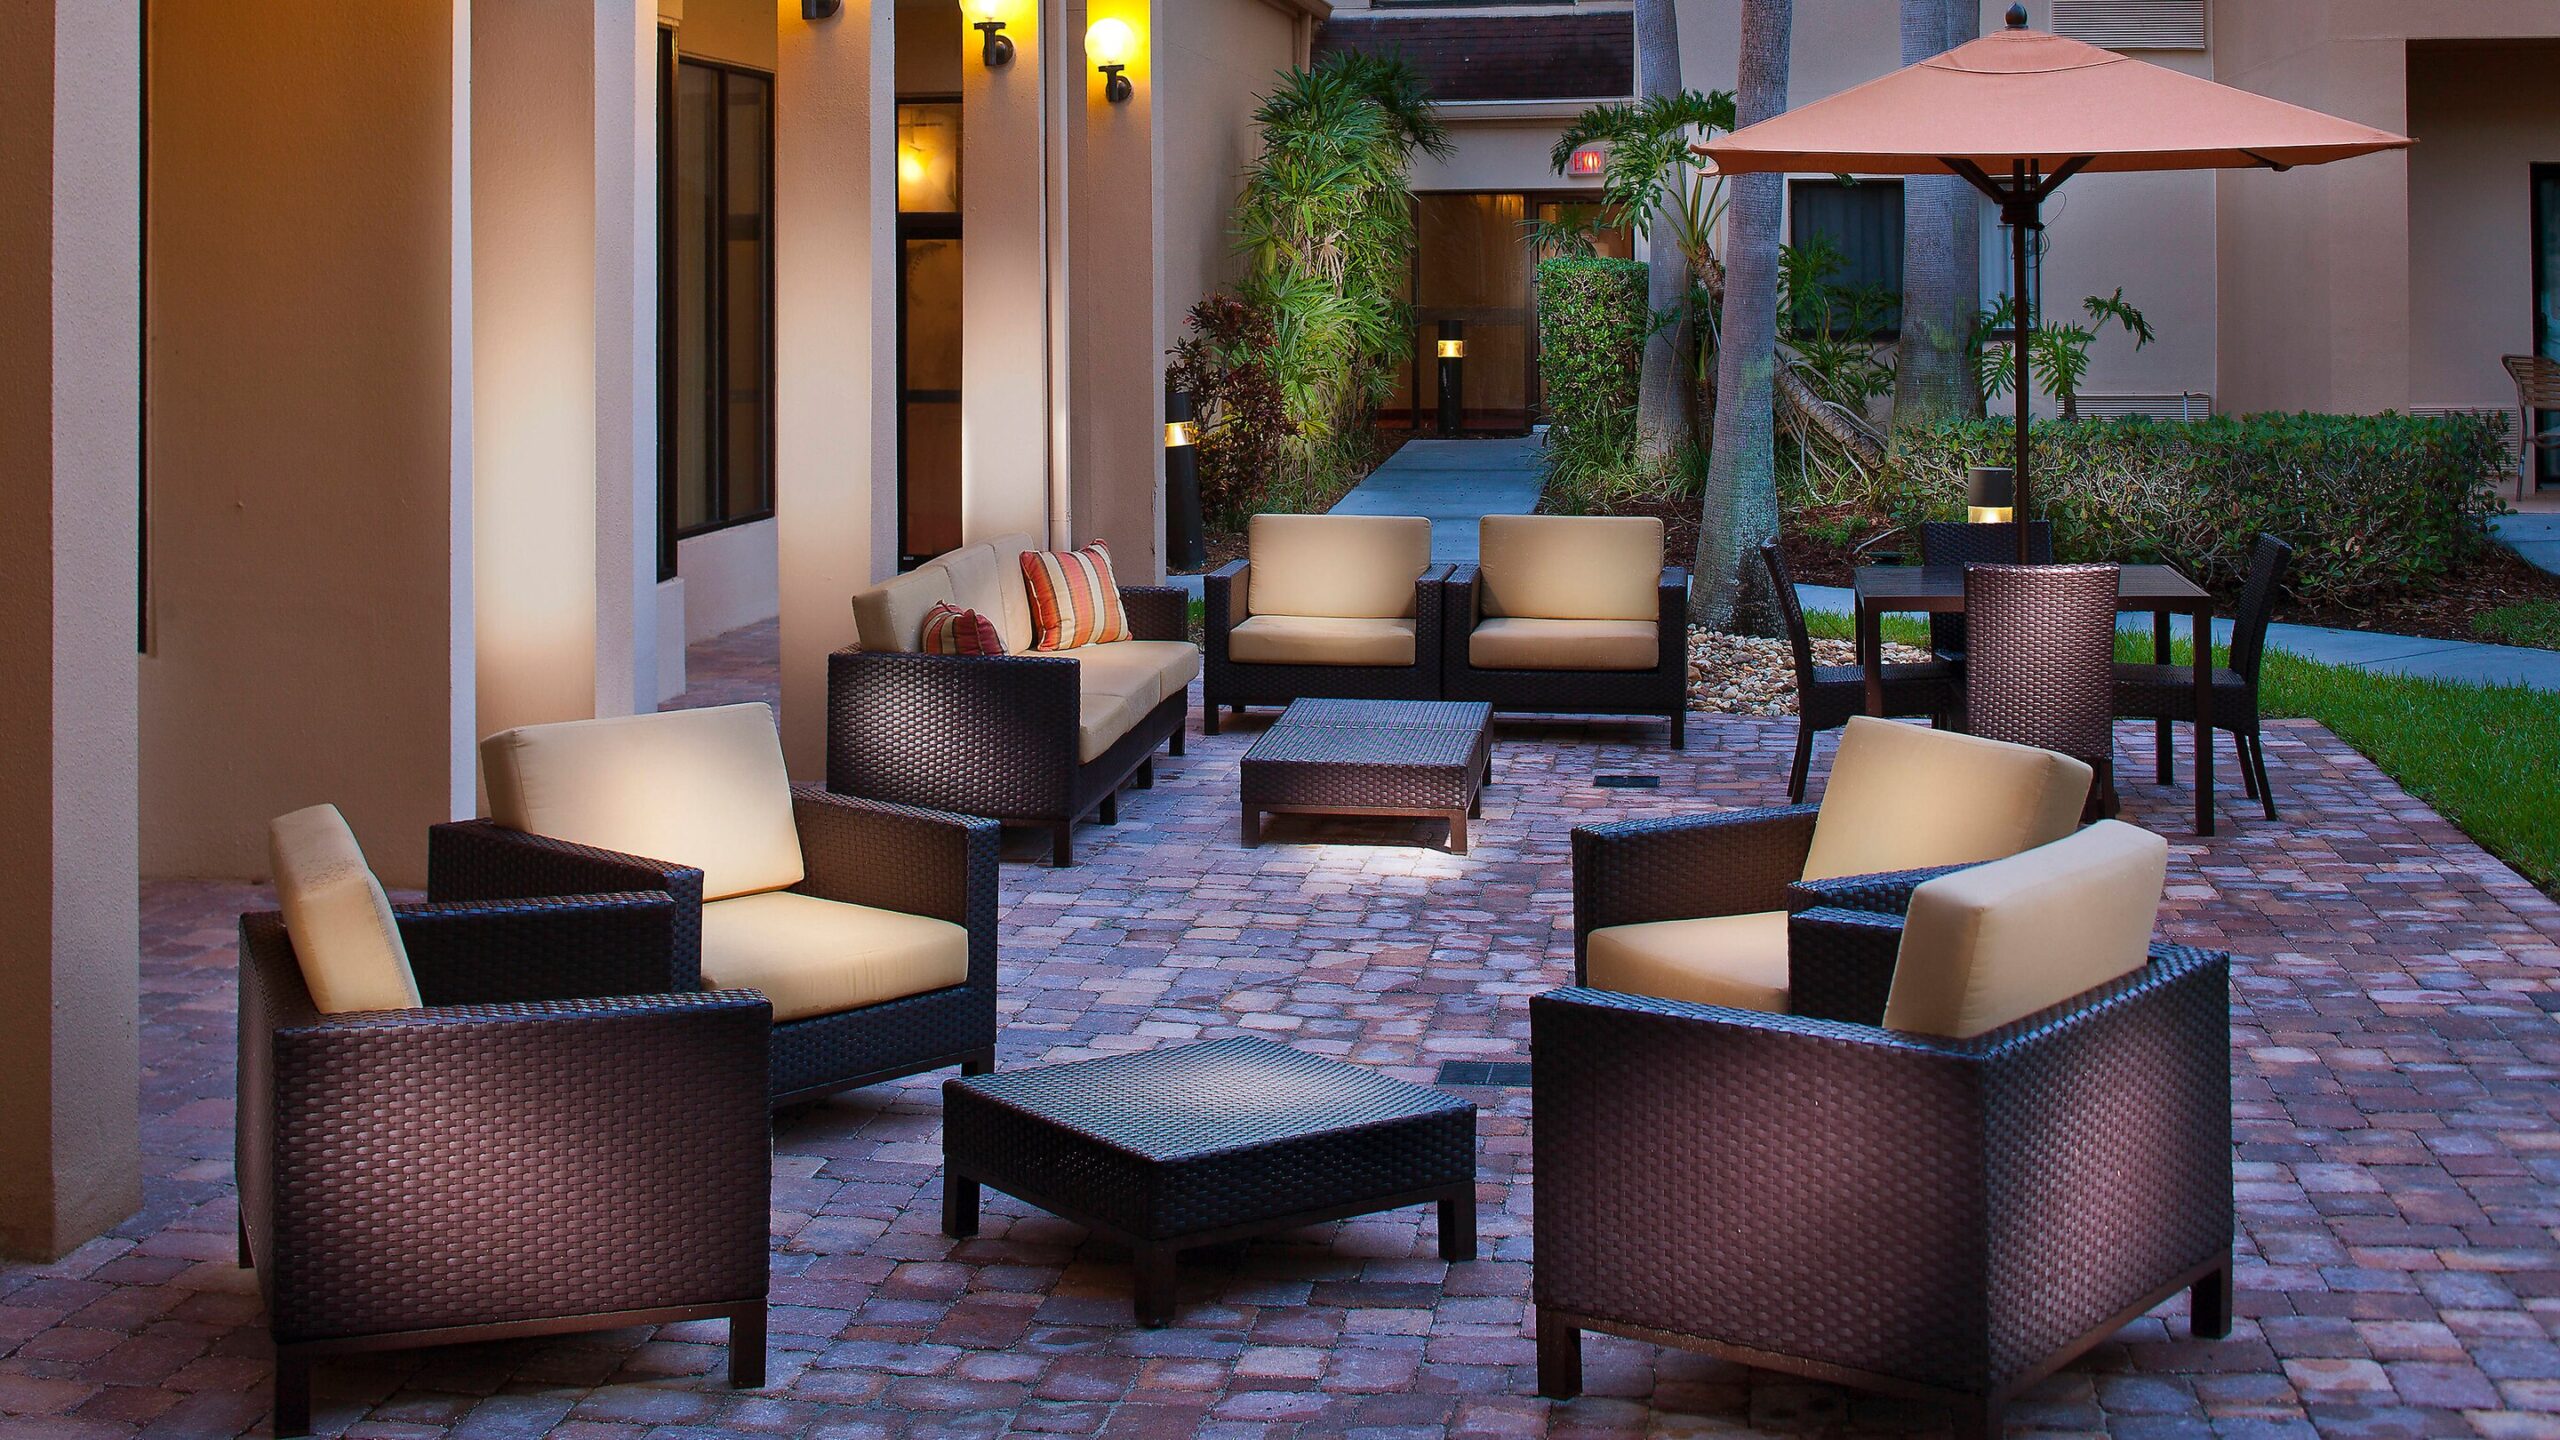 Patio seating at a the Courtyard by Marriott Melbourne West